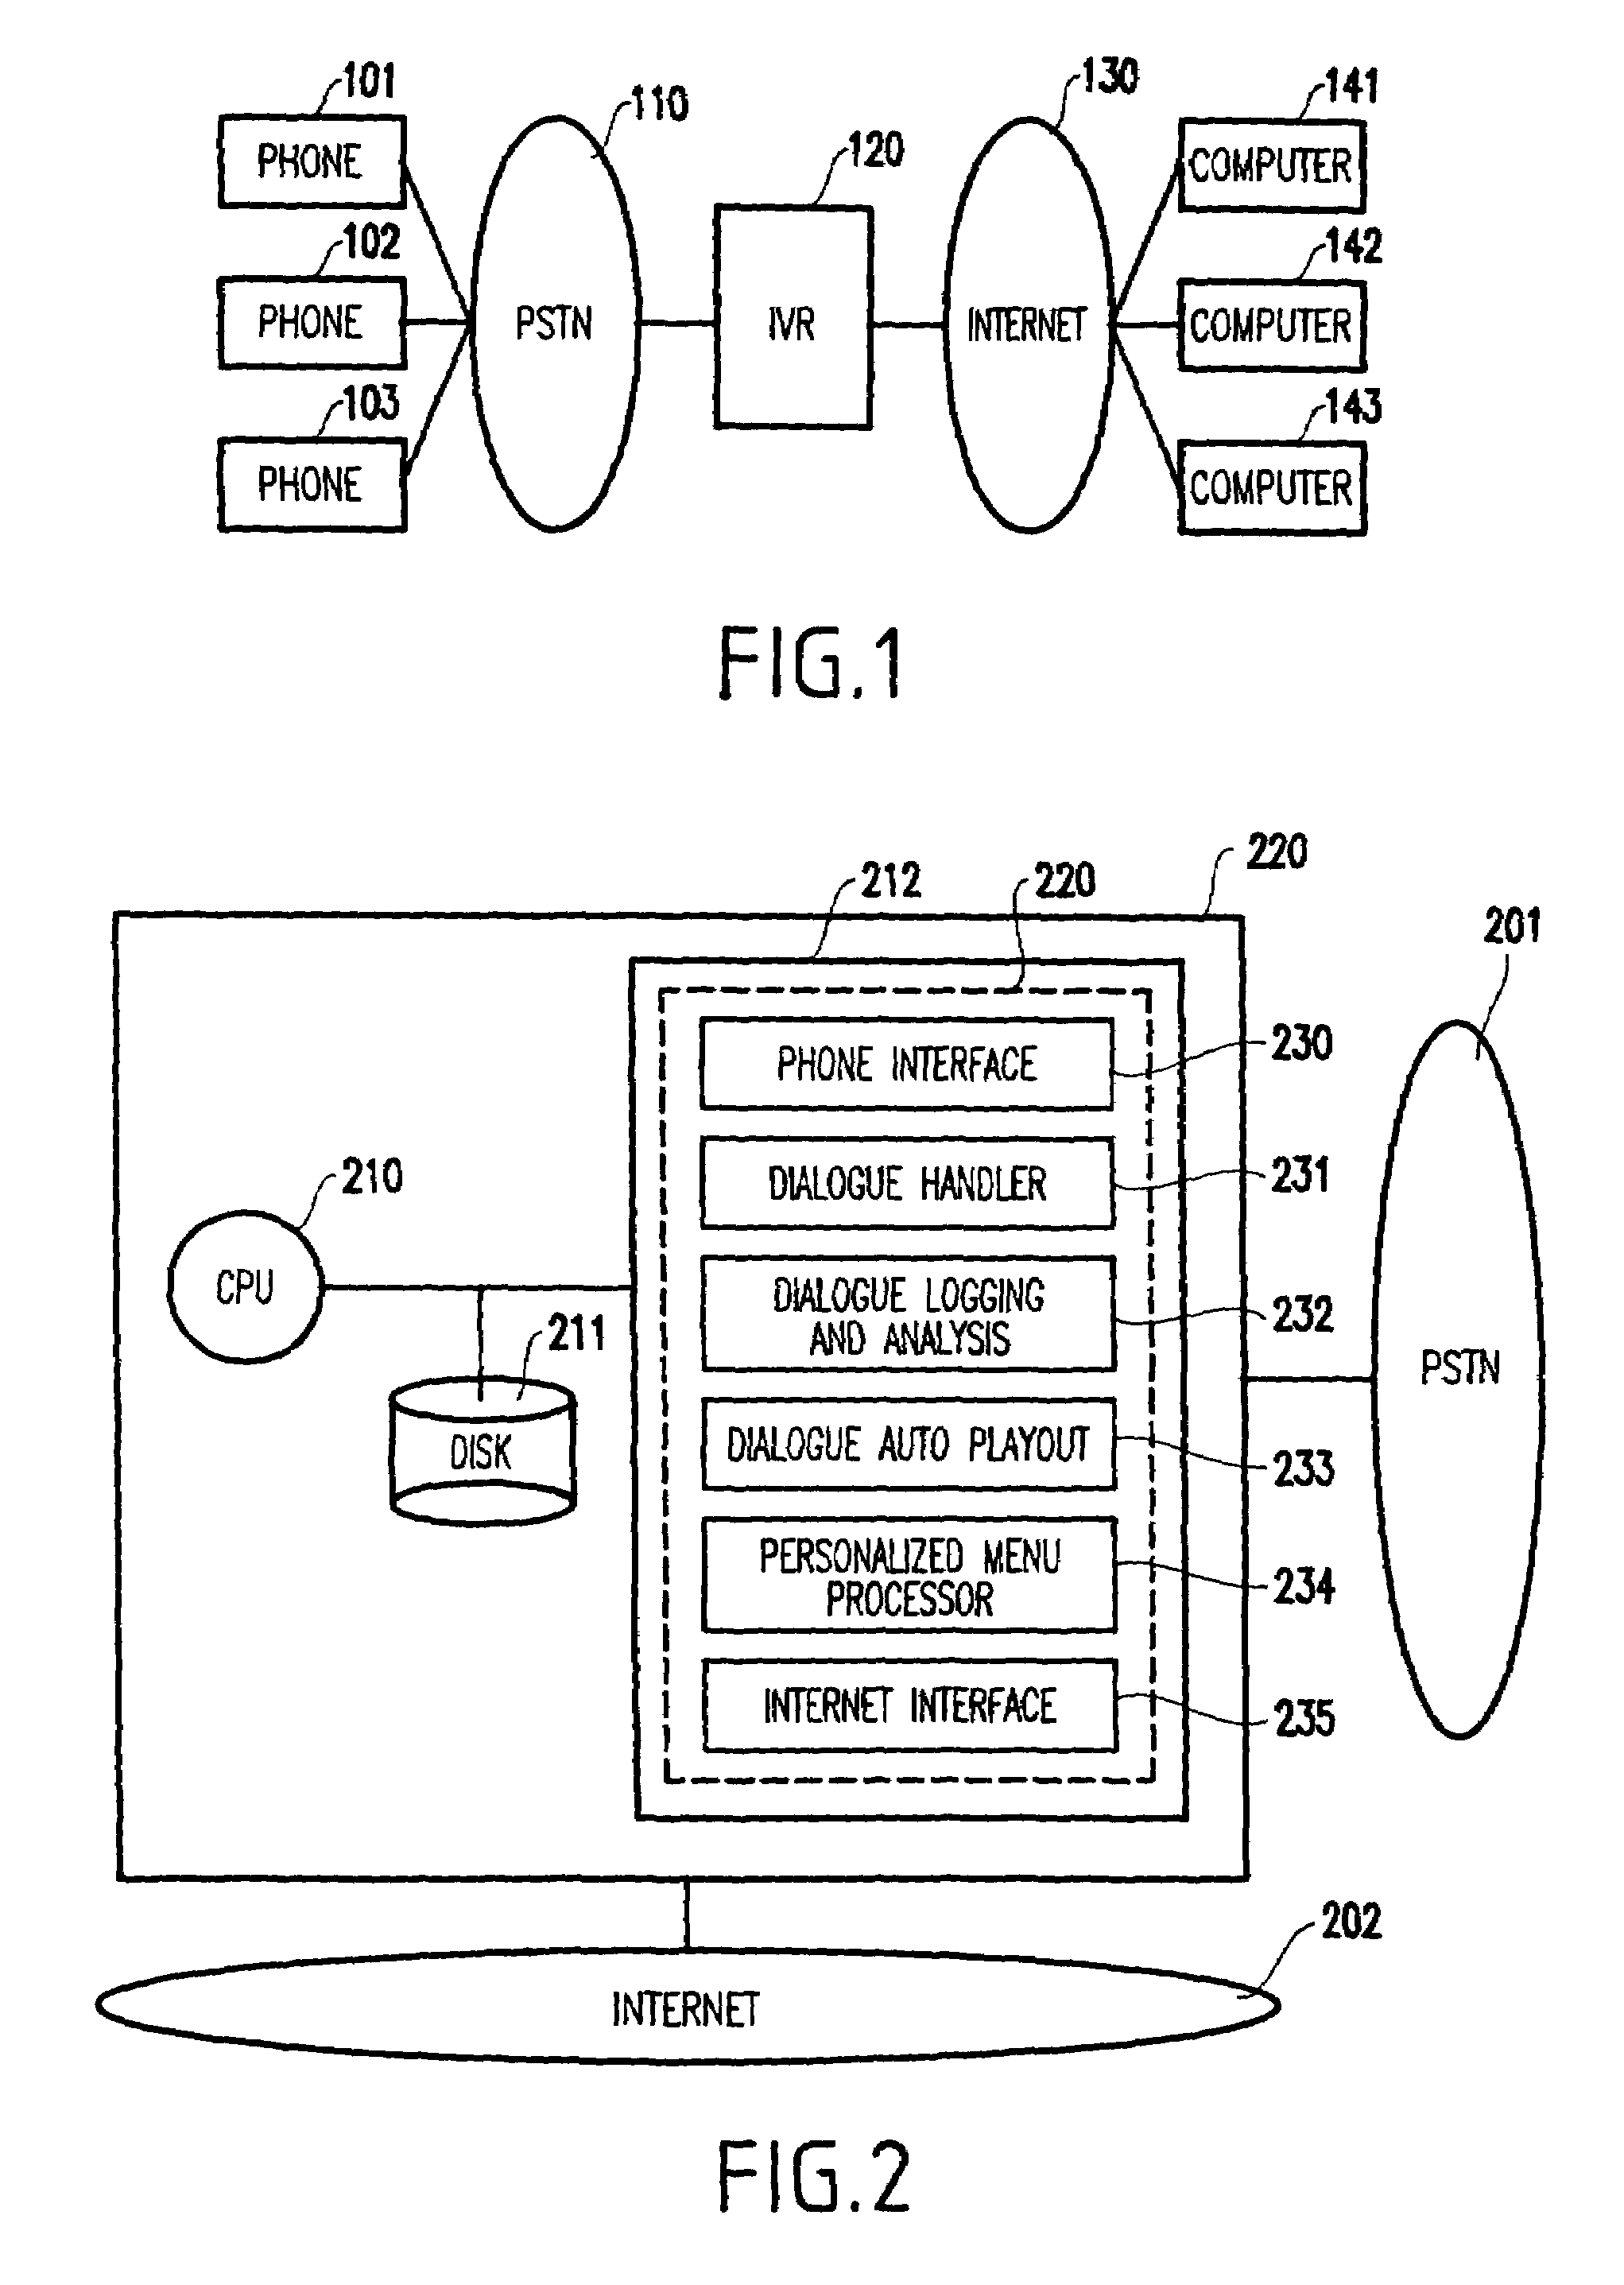 System and method for personalizing dialogue menu for an interactive voice response system